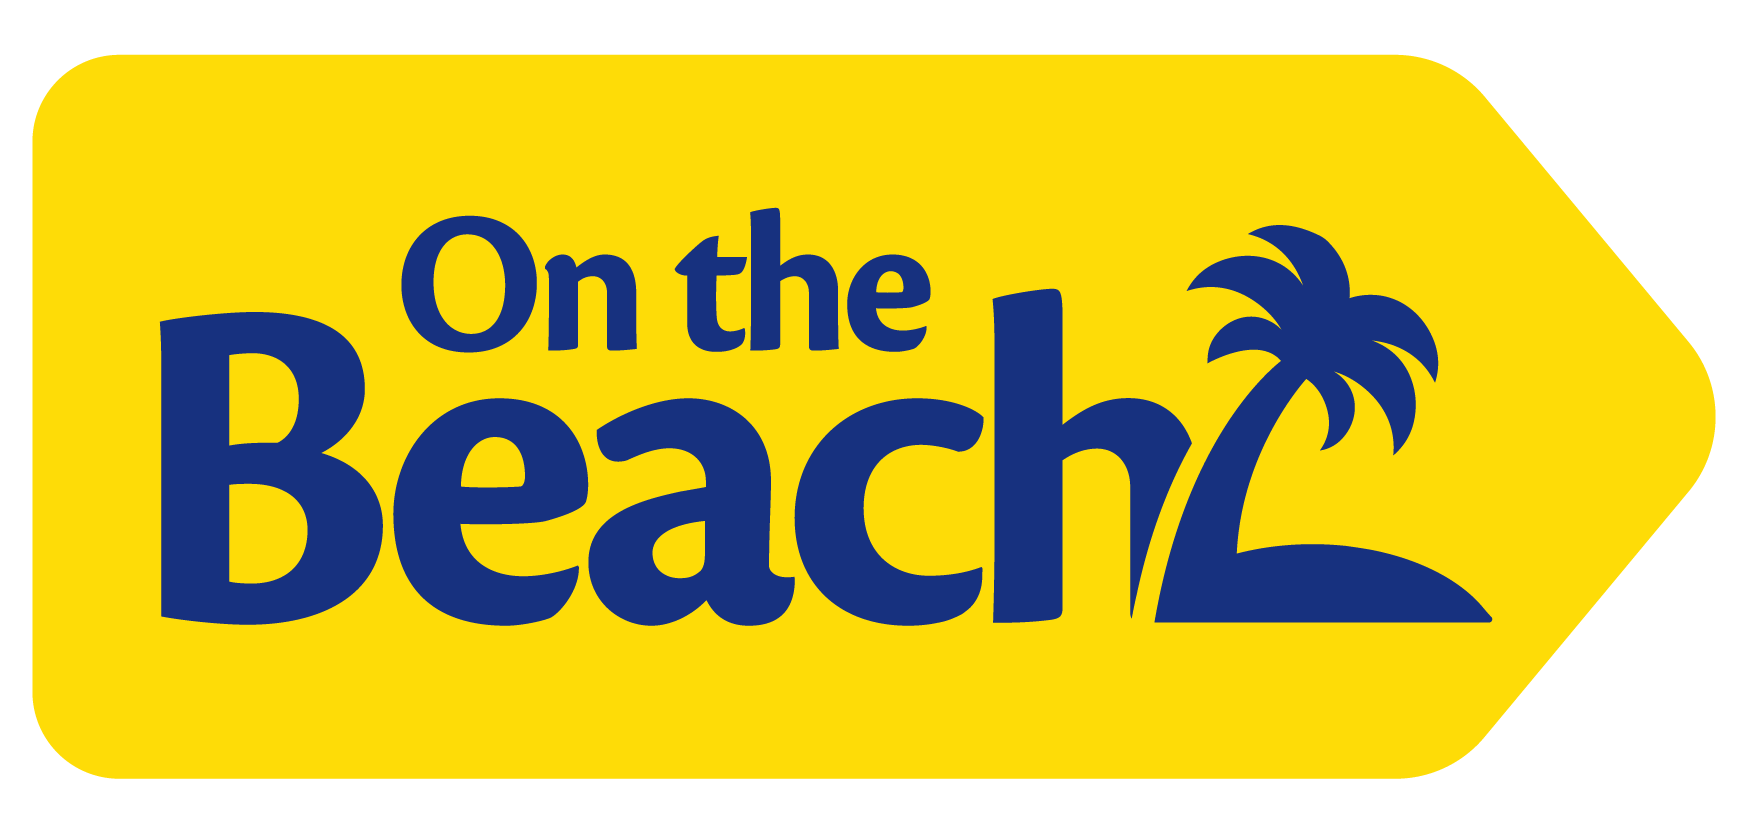  On The Beach discount code